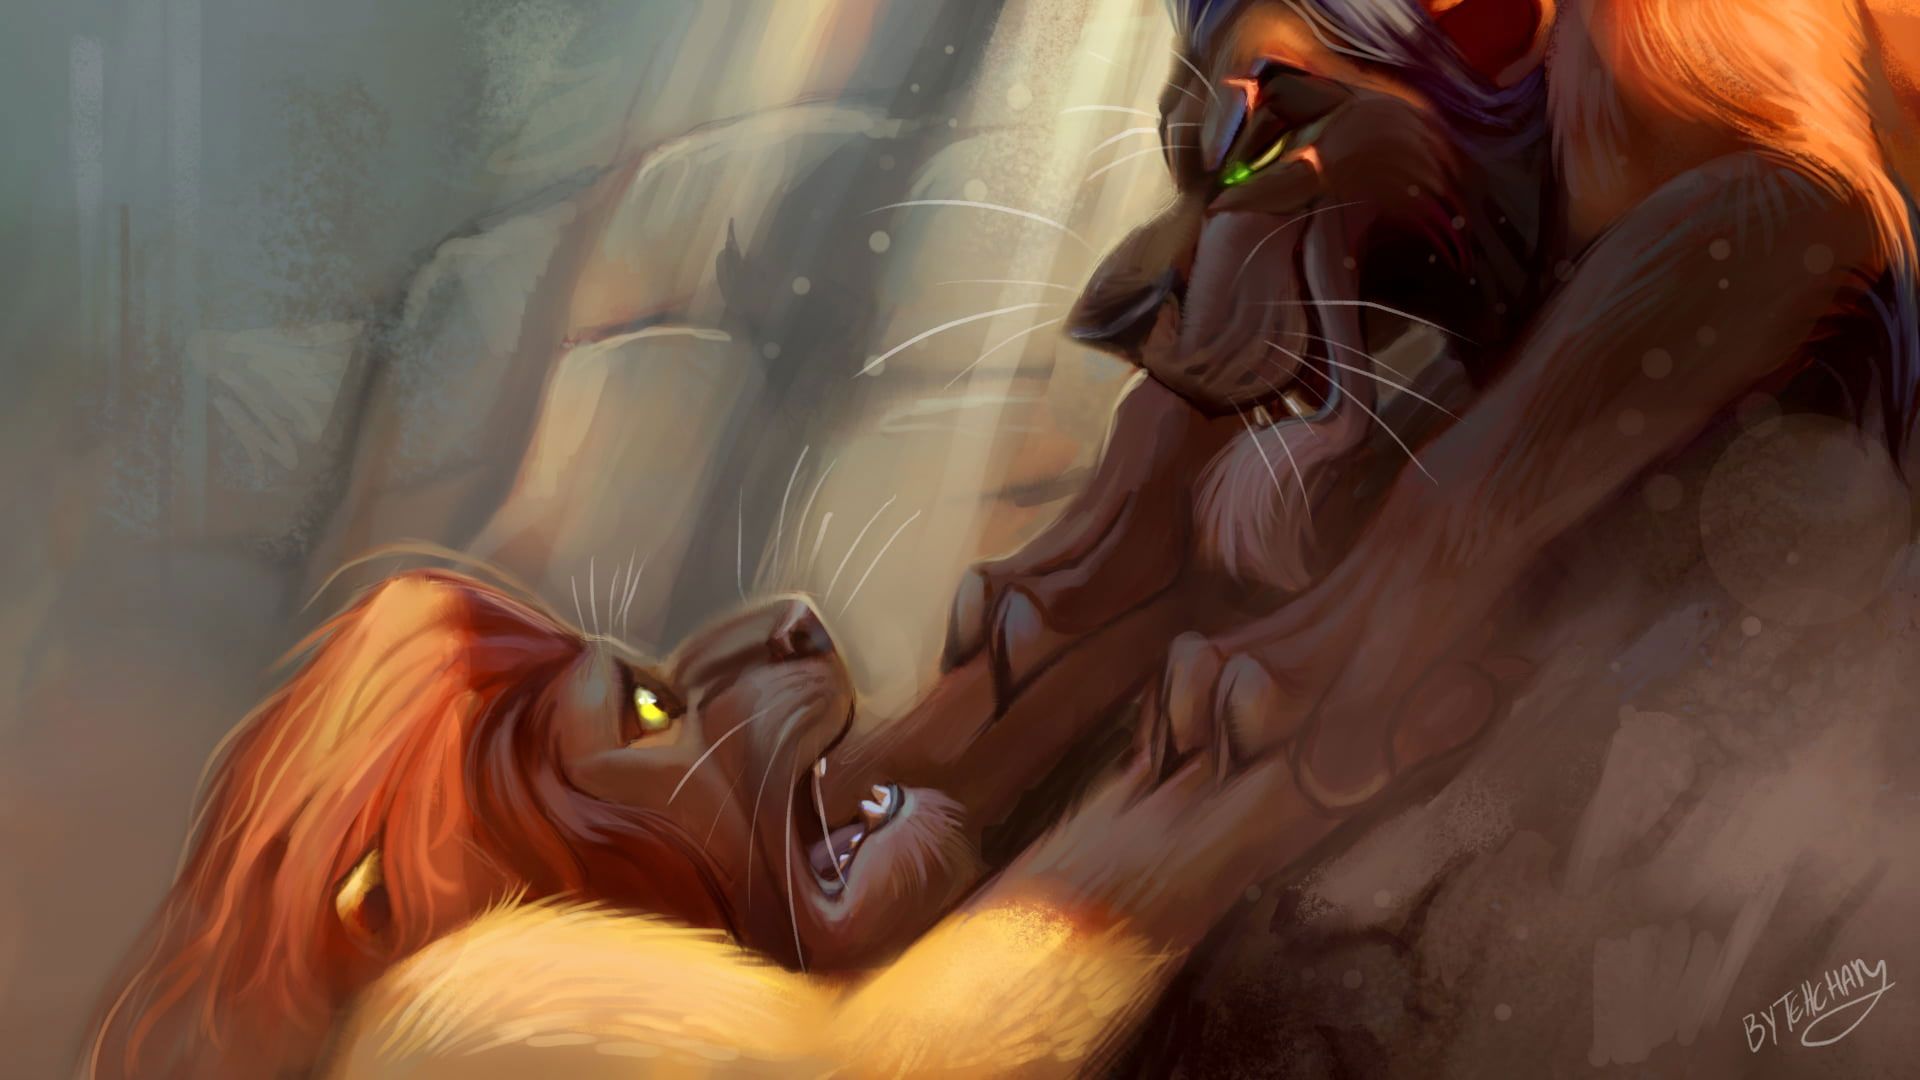 A lion and tiger fighting in the woods - The Lion King